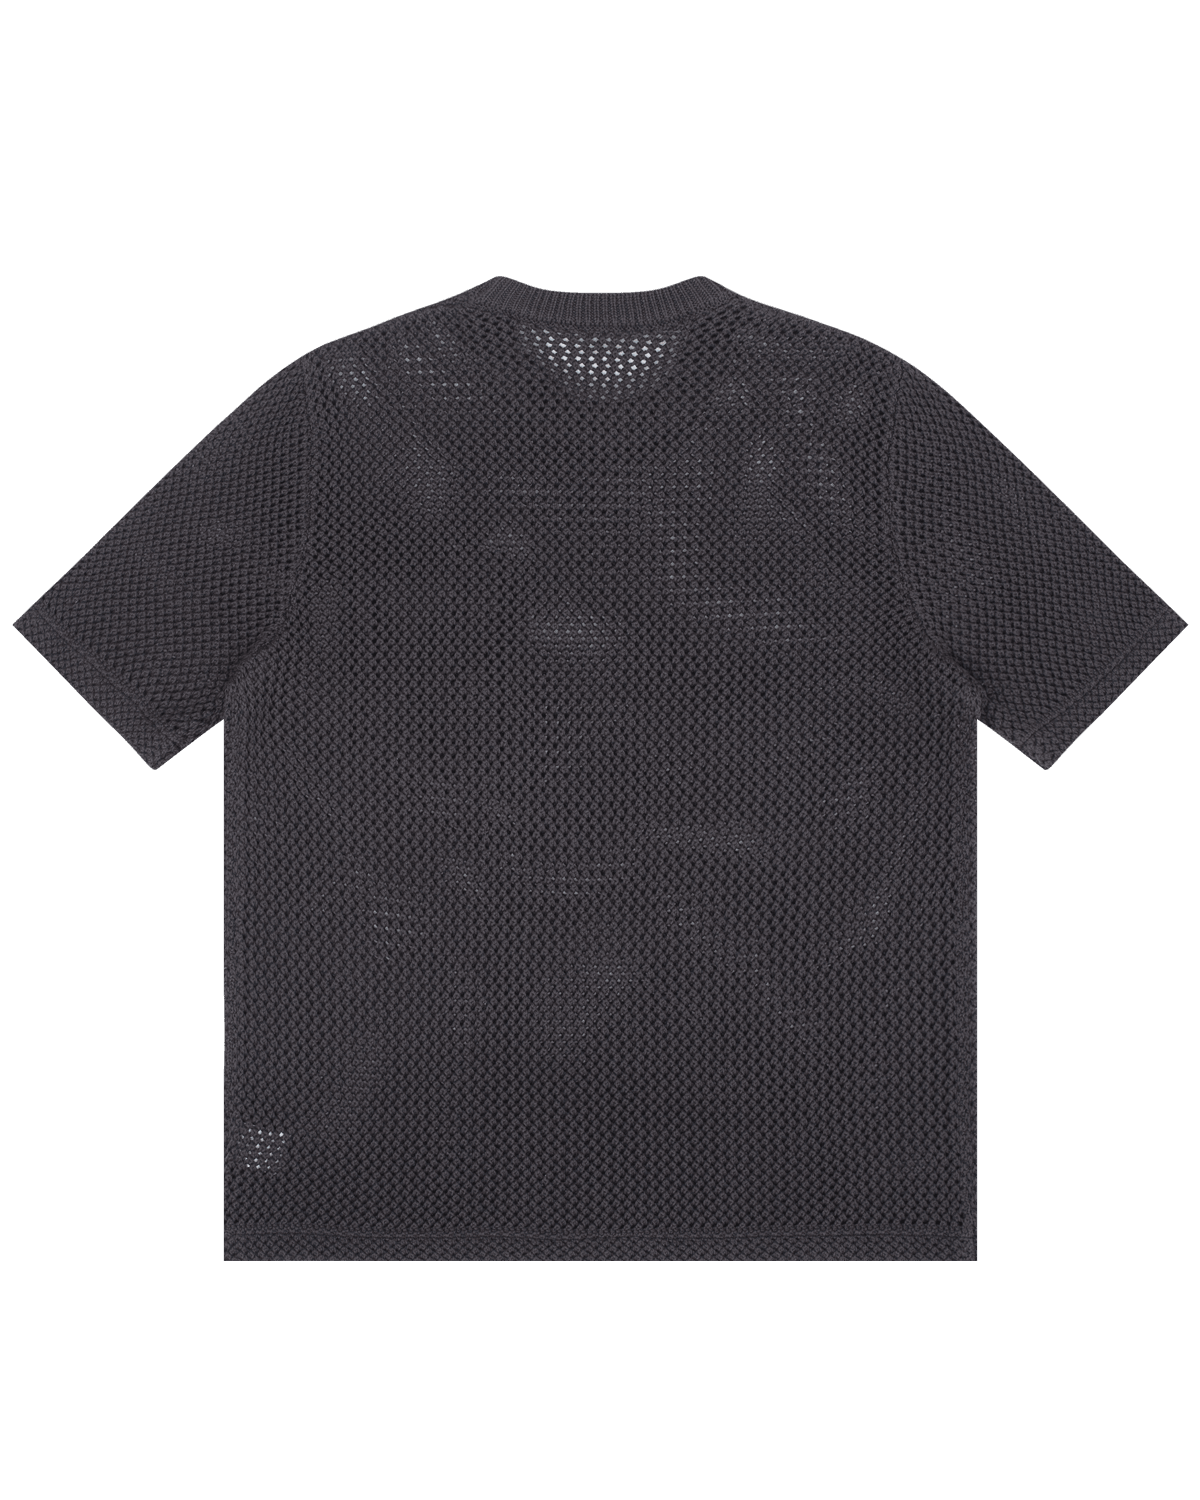 TAKA ORIGINAL LIMITED - Off The Label hybrid structures short-sleeve knitted t-shirt dark grey